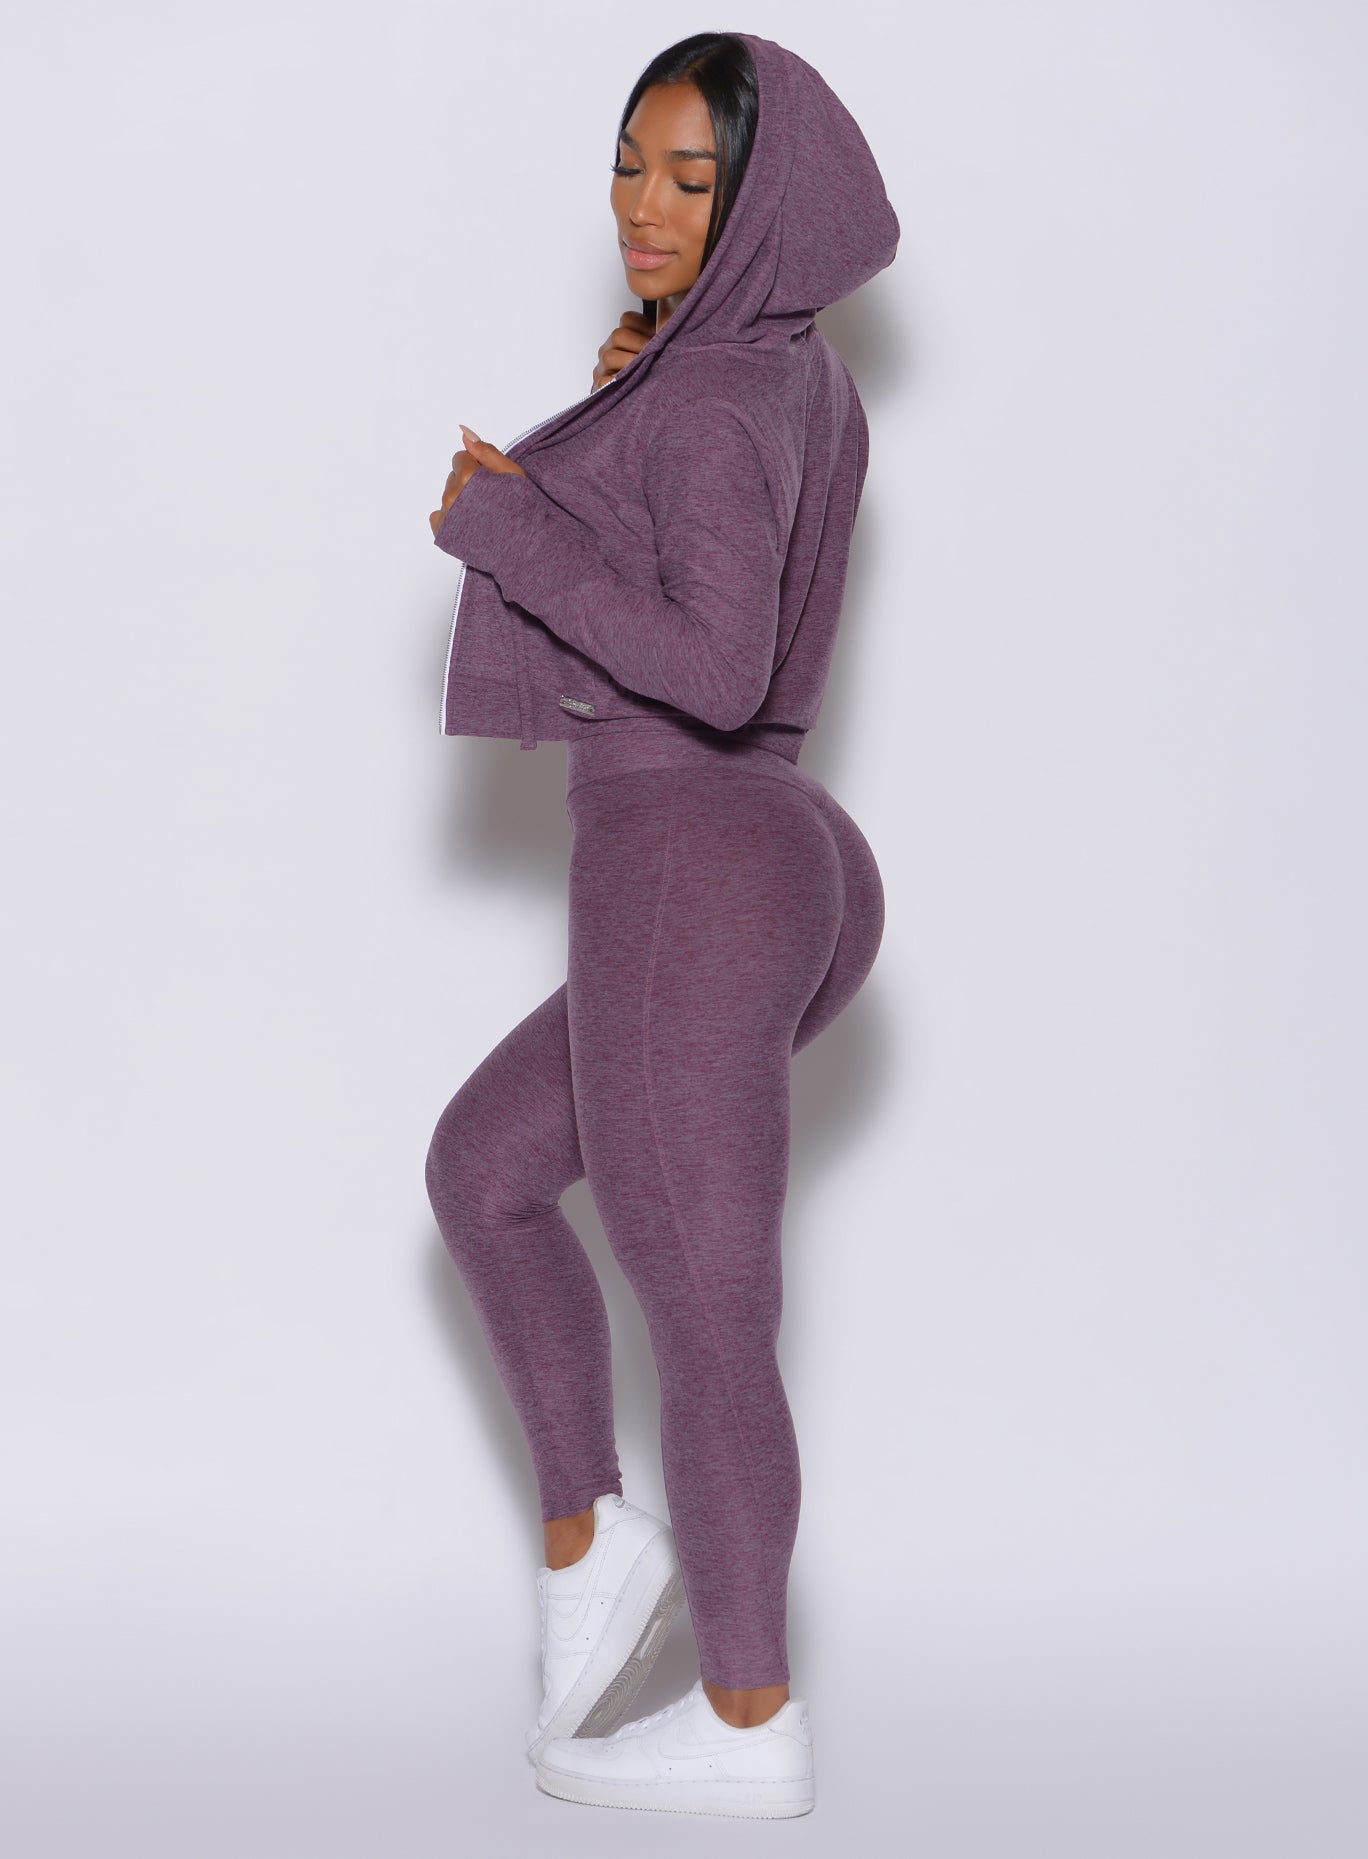 Left side profile view of a model in our cloud leggings in regal purple color and a matching hoodie